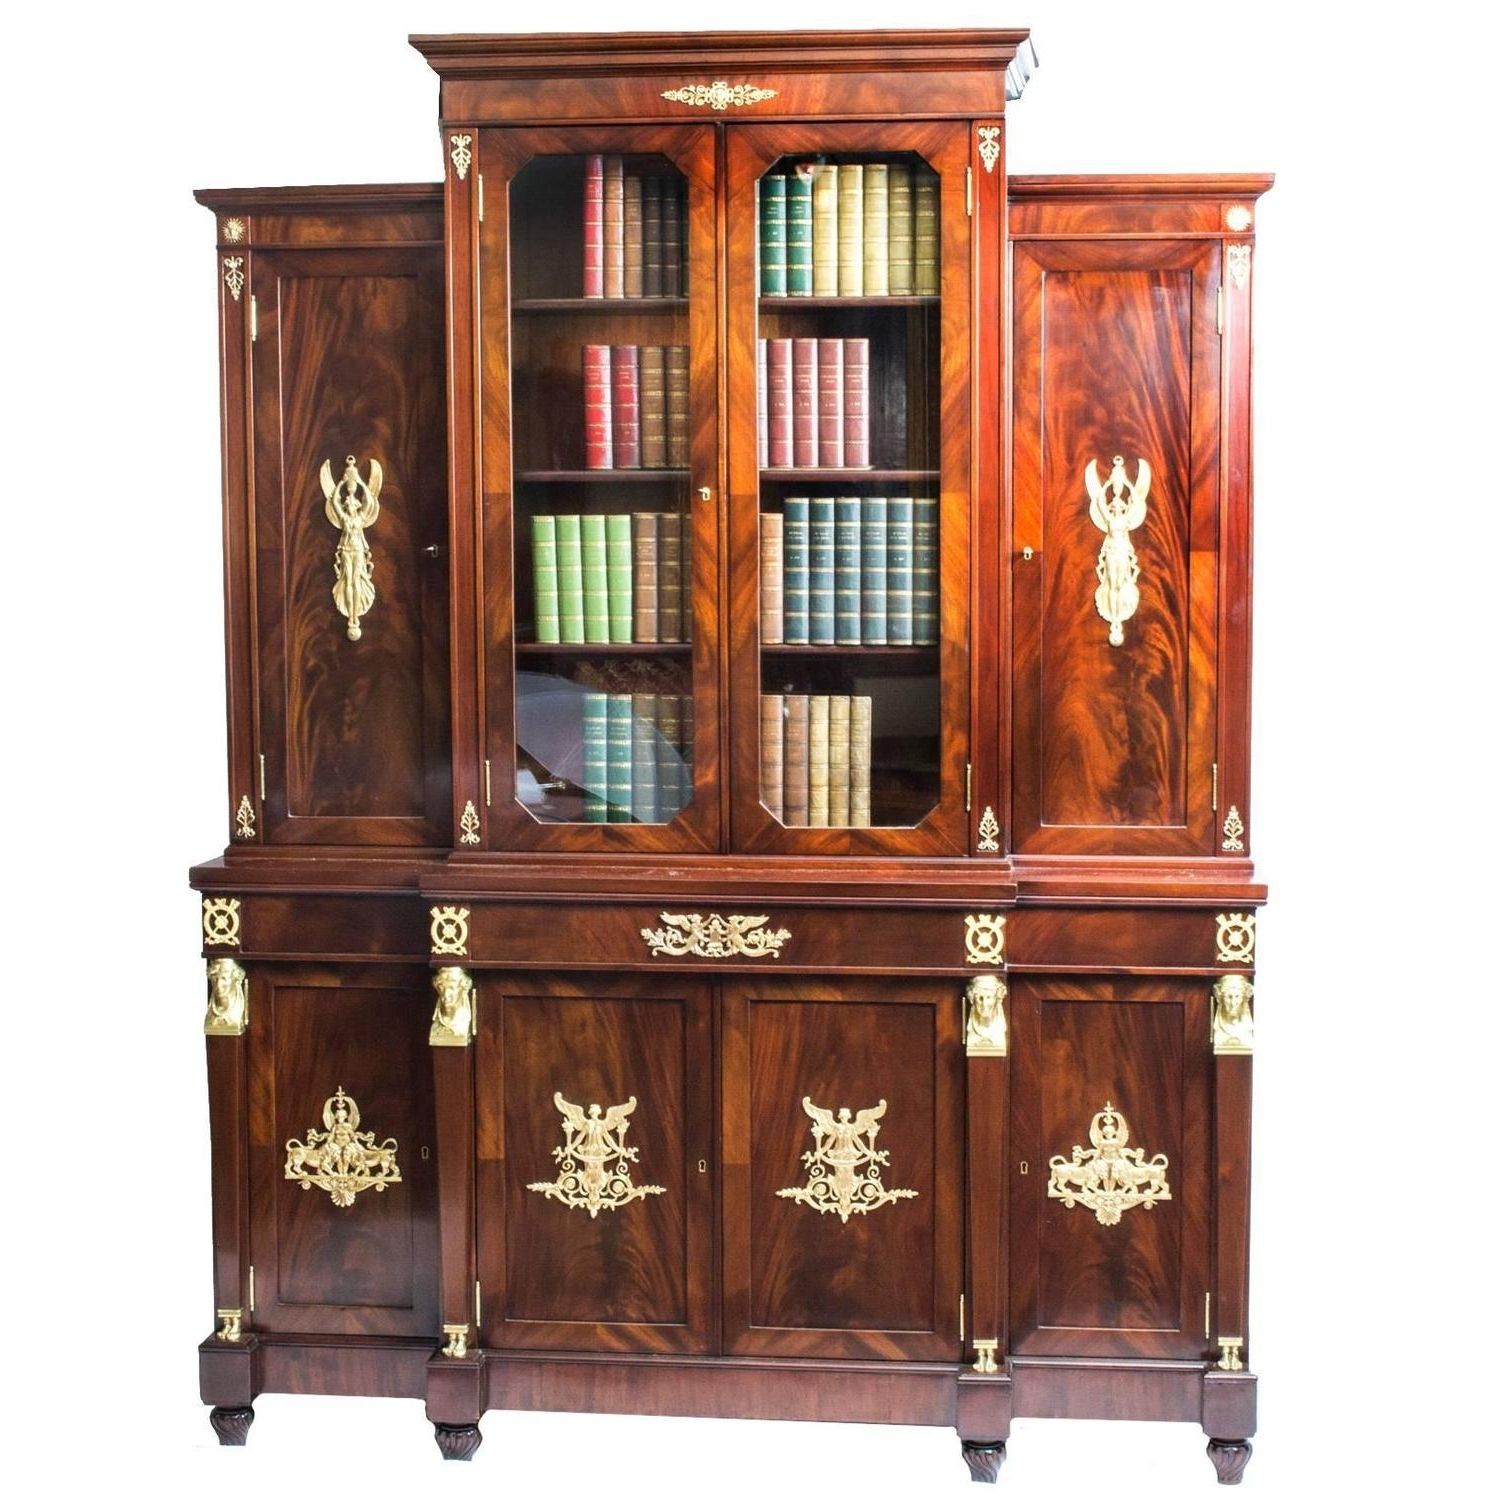 Mahogany Bookcases Pertaining To 2017 19th Century Empire Mahogany Bookcase Cabinet For Sale At 1stdibs (View 11 of 15)